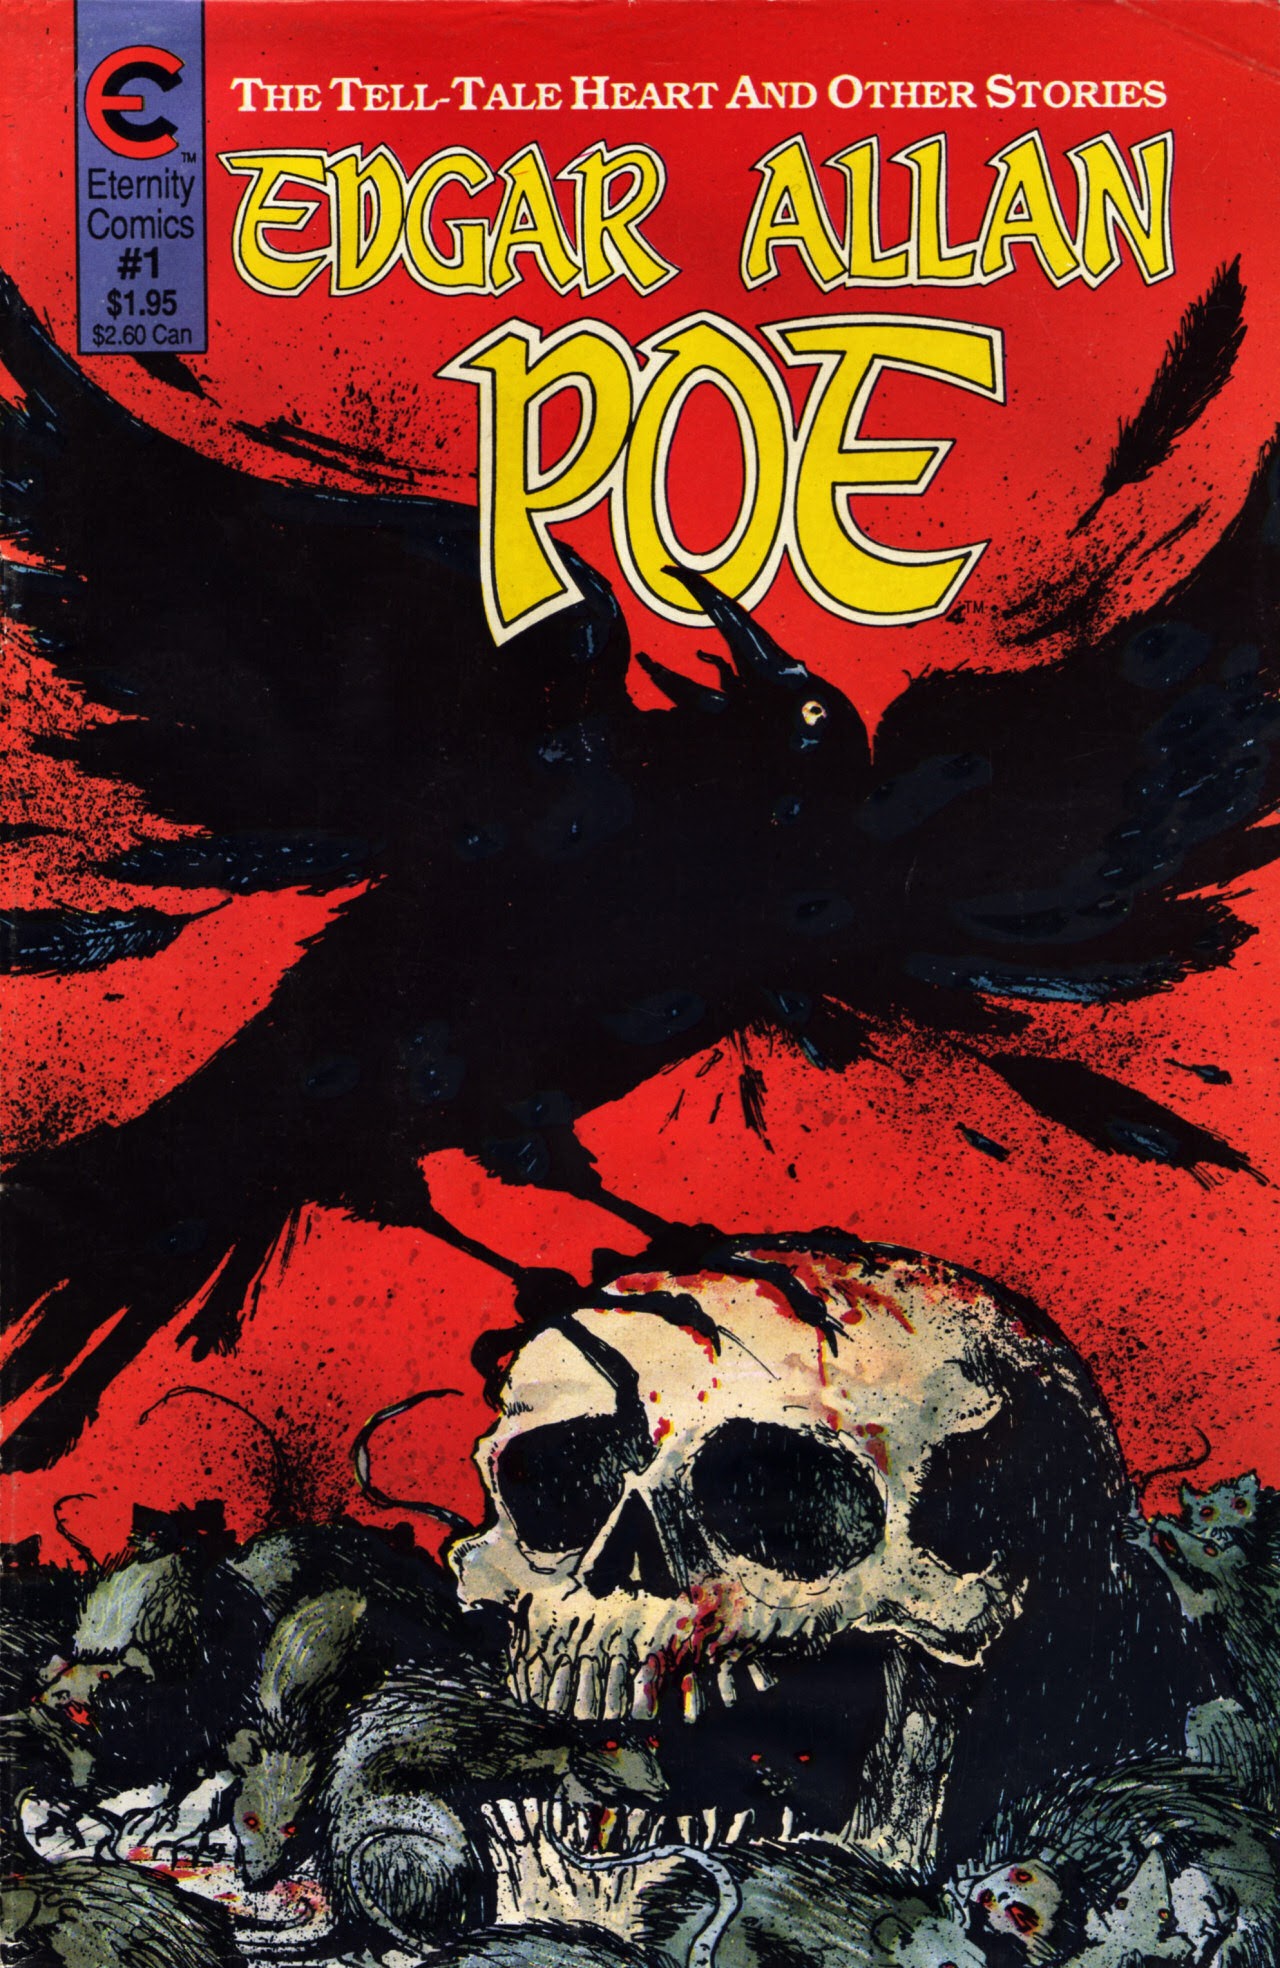 Read online Edgar Allan Poe: The Tell-Tale Heart and Other Stories comic -  Issue # Full - 1